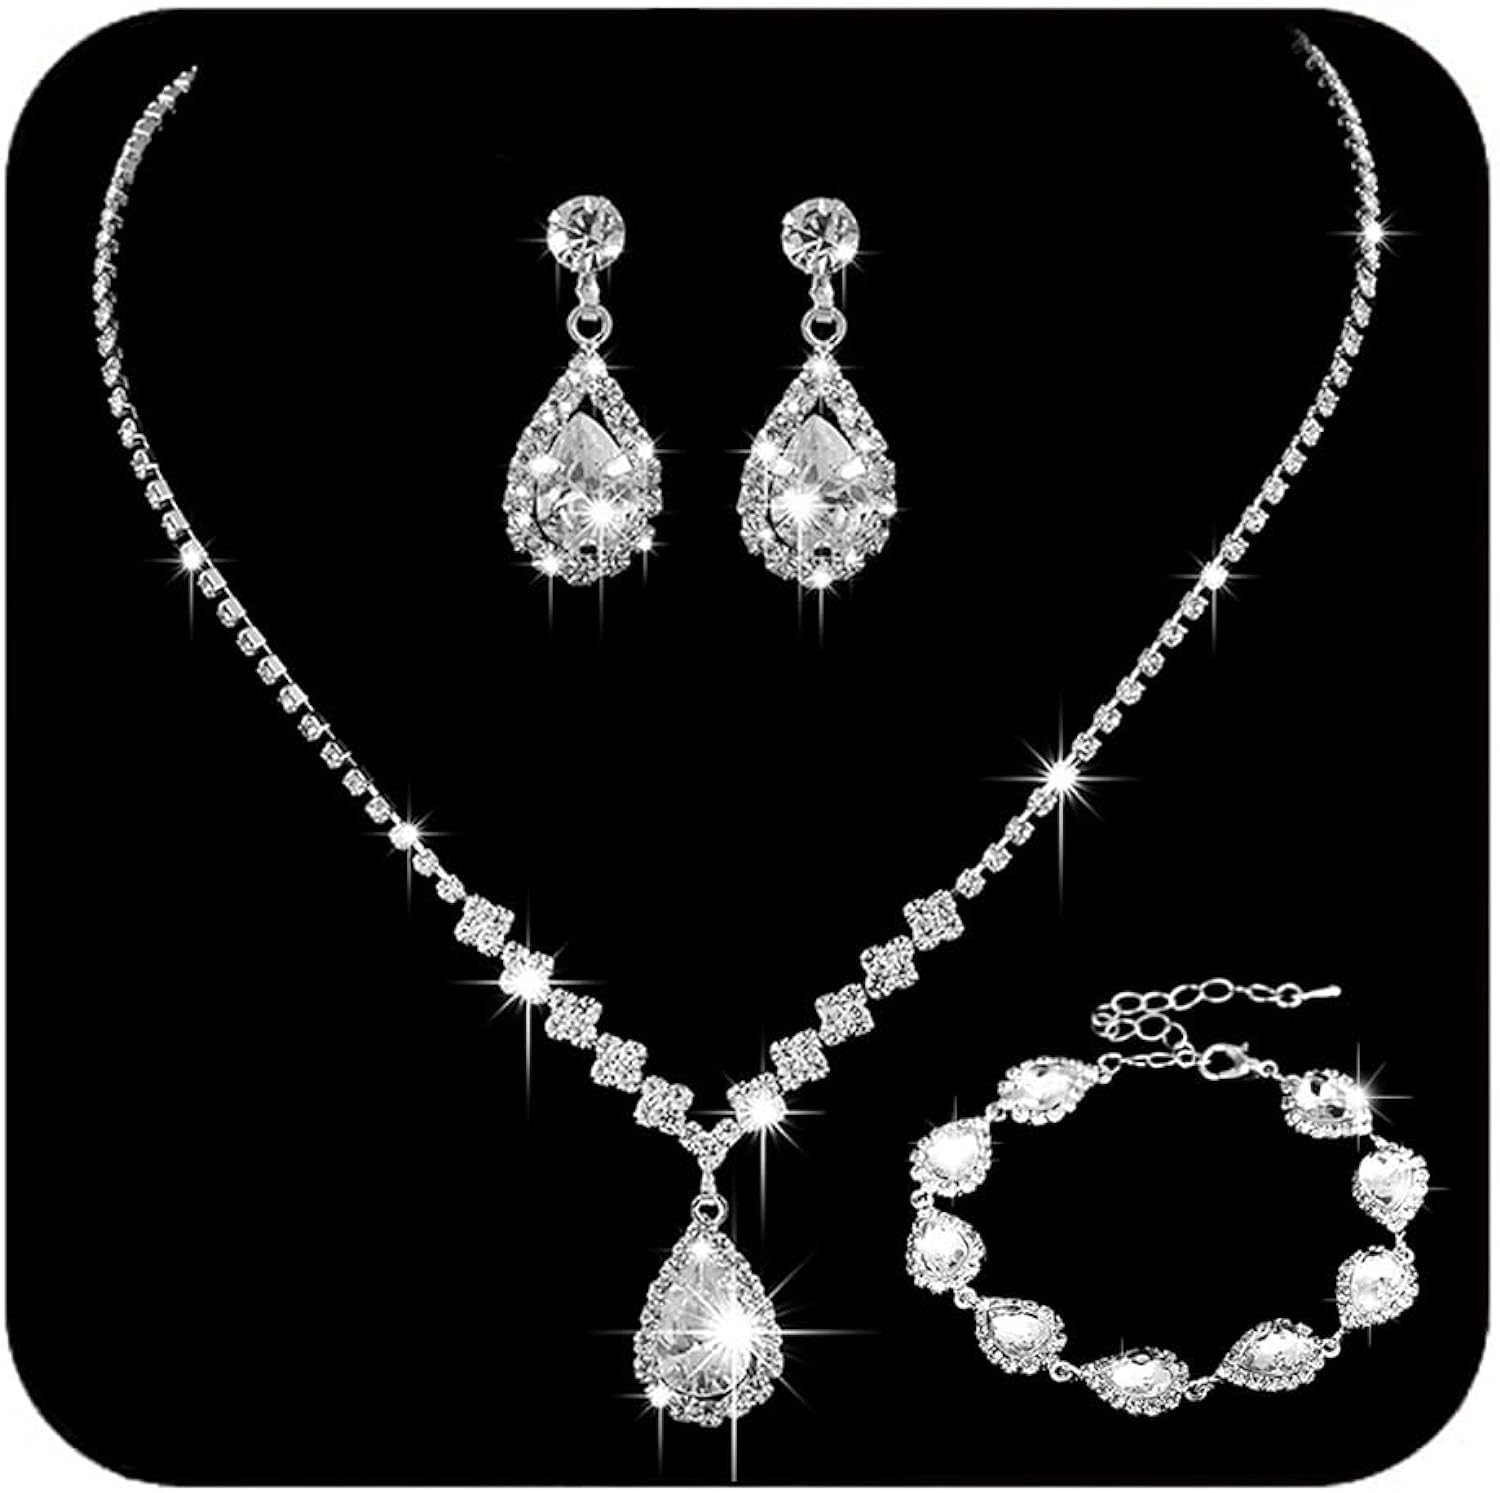 Unicra Bride Crystal Necklace Earrings Set Bridal Wedding Jewelry Sets Rhinestone Choker Necklace Prom Costume Jewelry Set for Women and Girls(3 piece set - 2 earrings and 1 necklace)